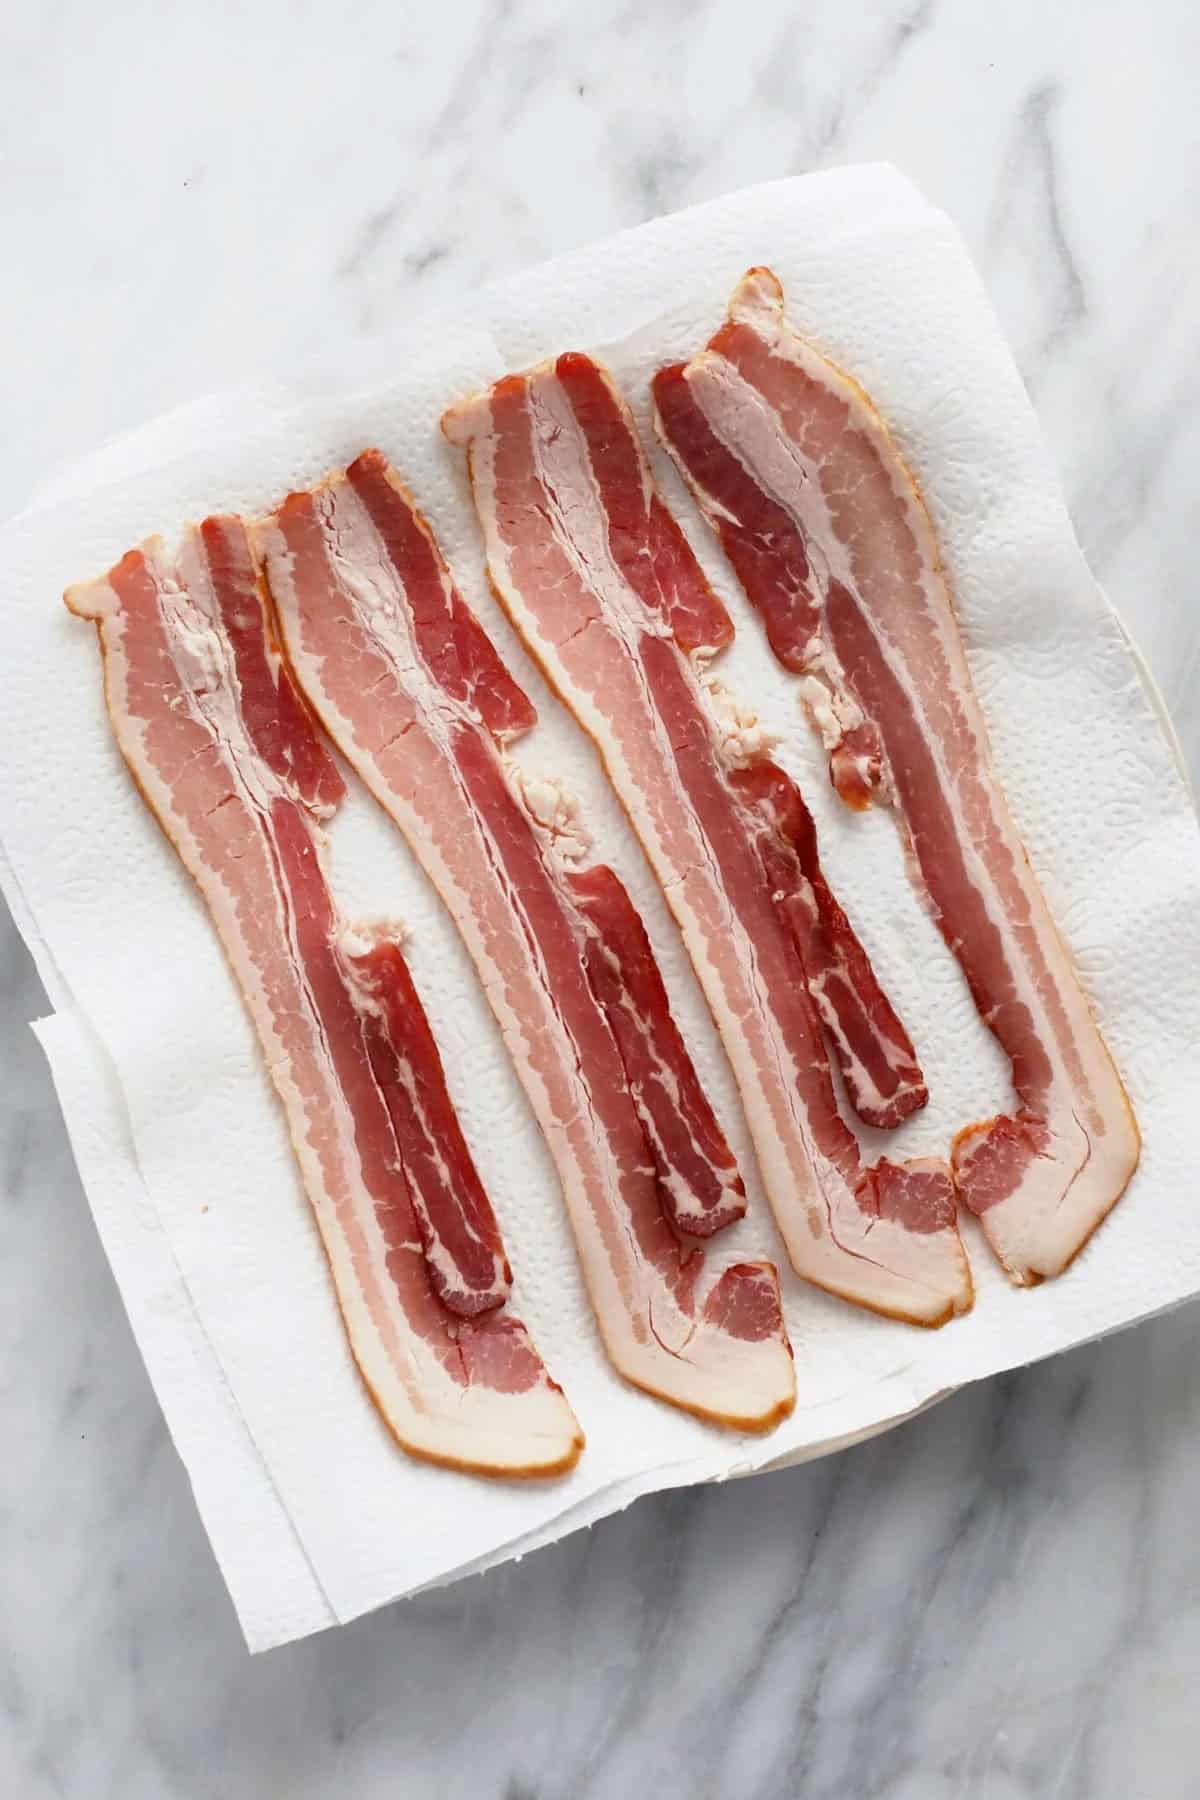 https://fitfoodiefinds.com/wp-content/uploads/2021/02/bacon-in-microwave.jpg